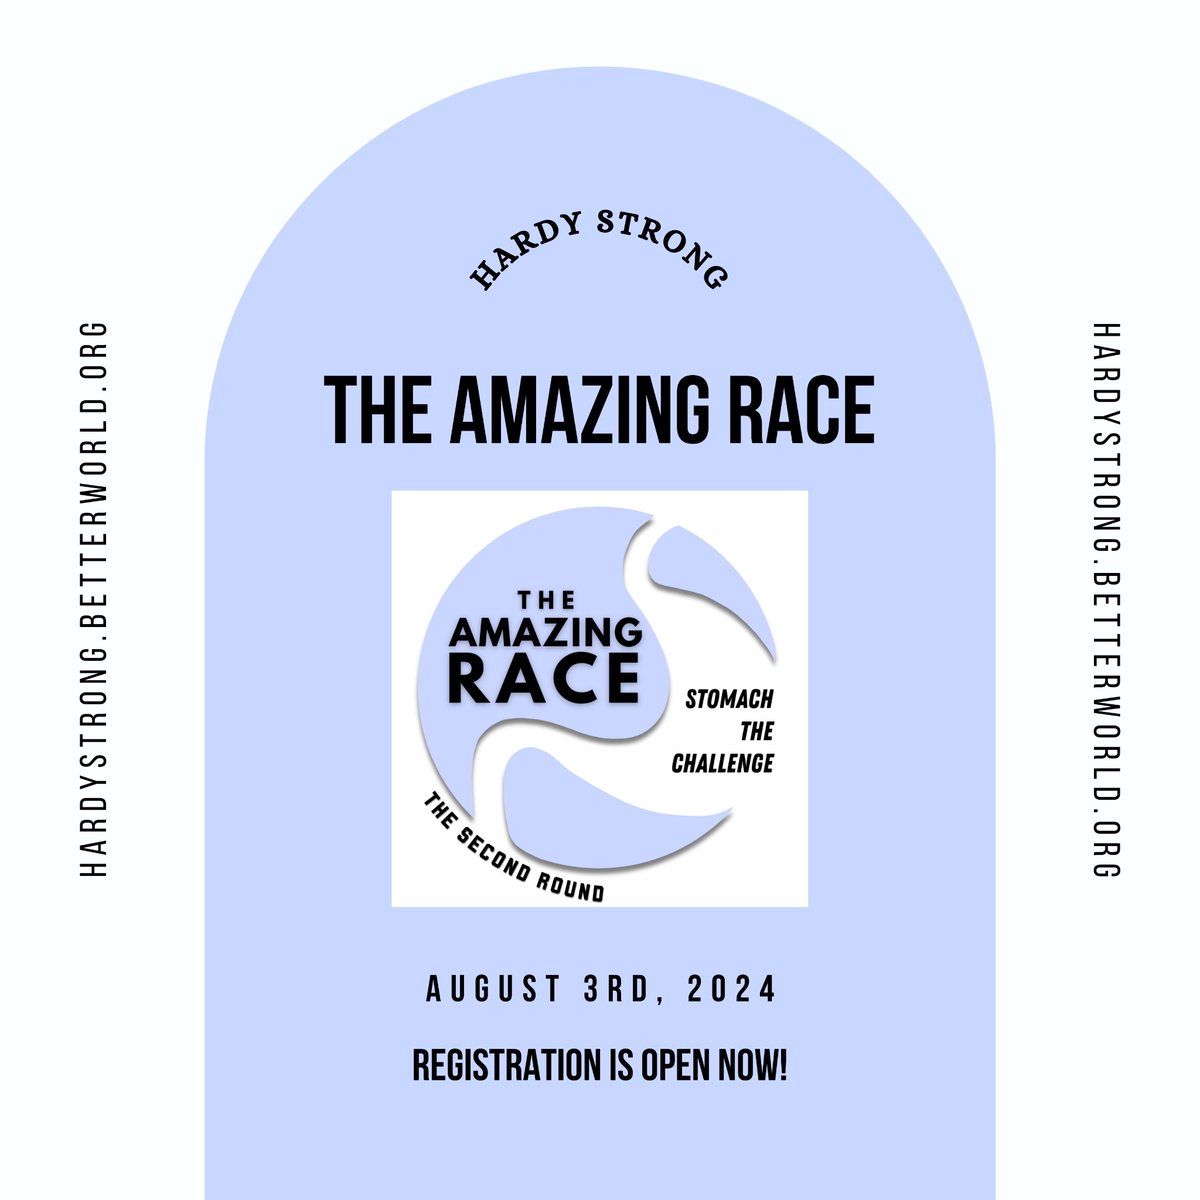 We can’t wait to see you all on August 3rd for the second round of The Amazing Race! Prepare to stomach the challenge this year - registration is live!